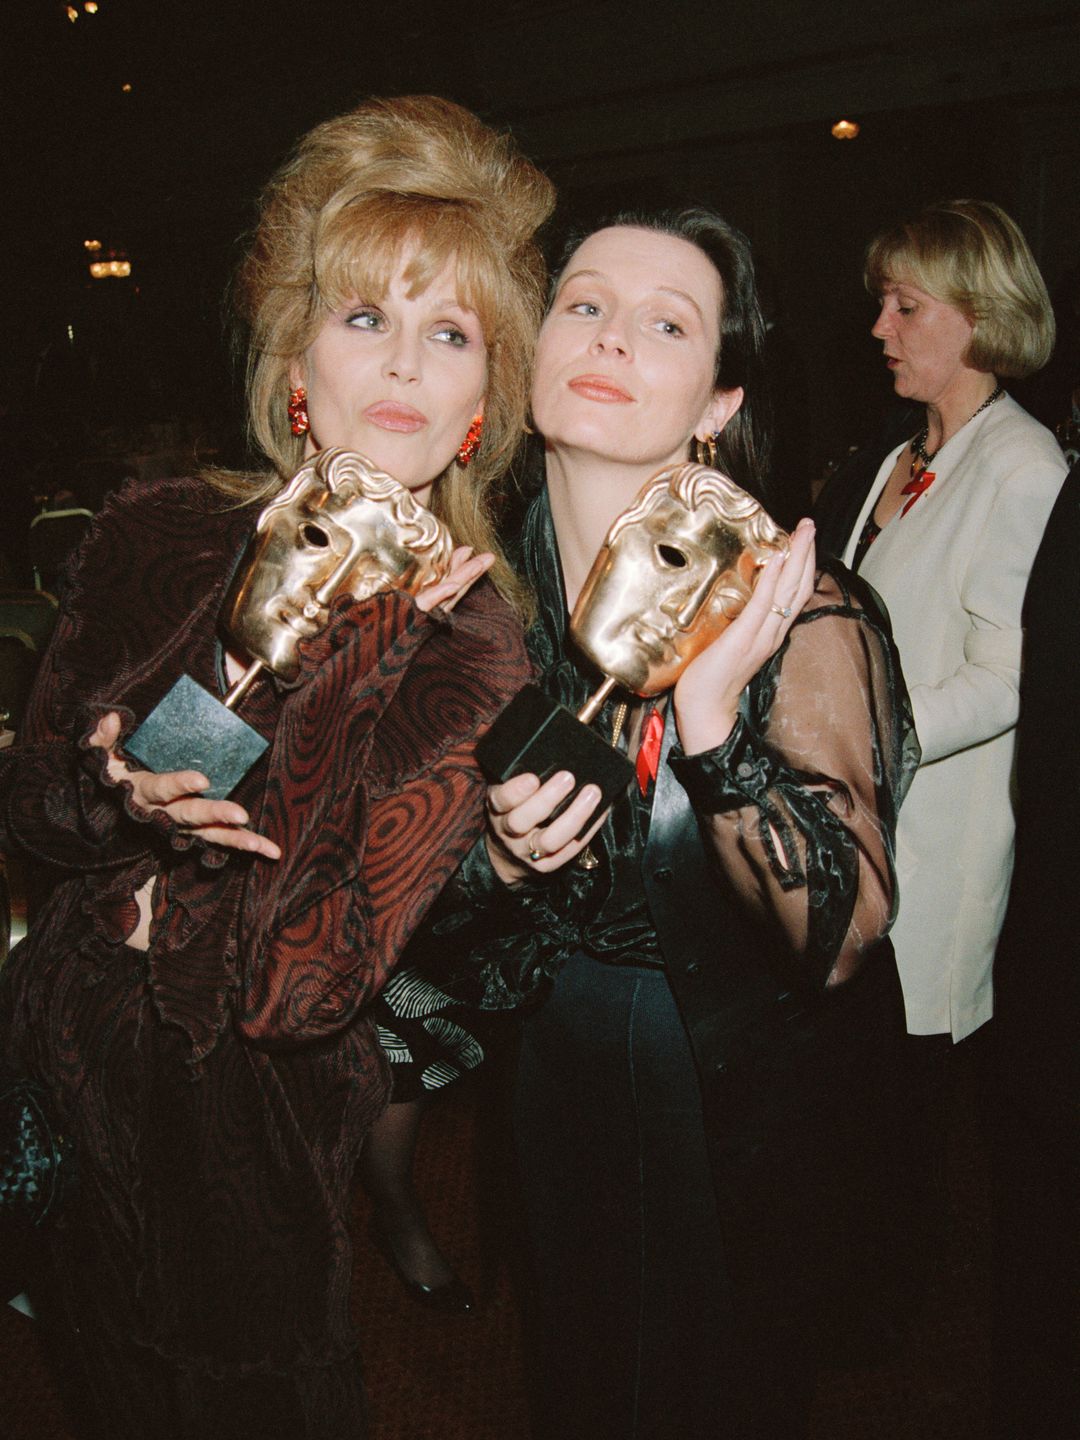 Joanna Lumley and Jennifer Saunders smiling at the BAFTAs 